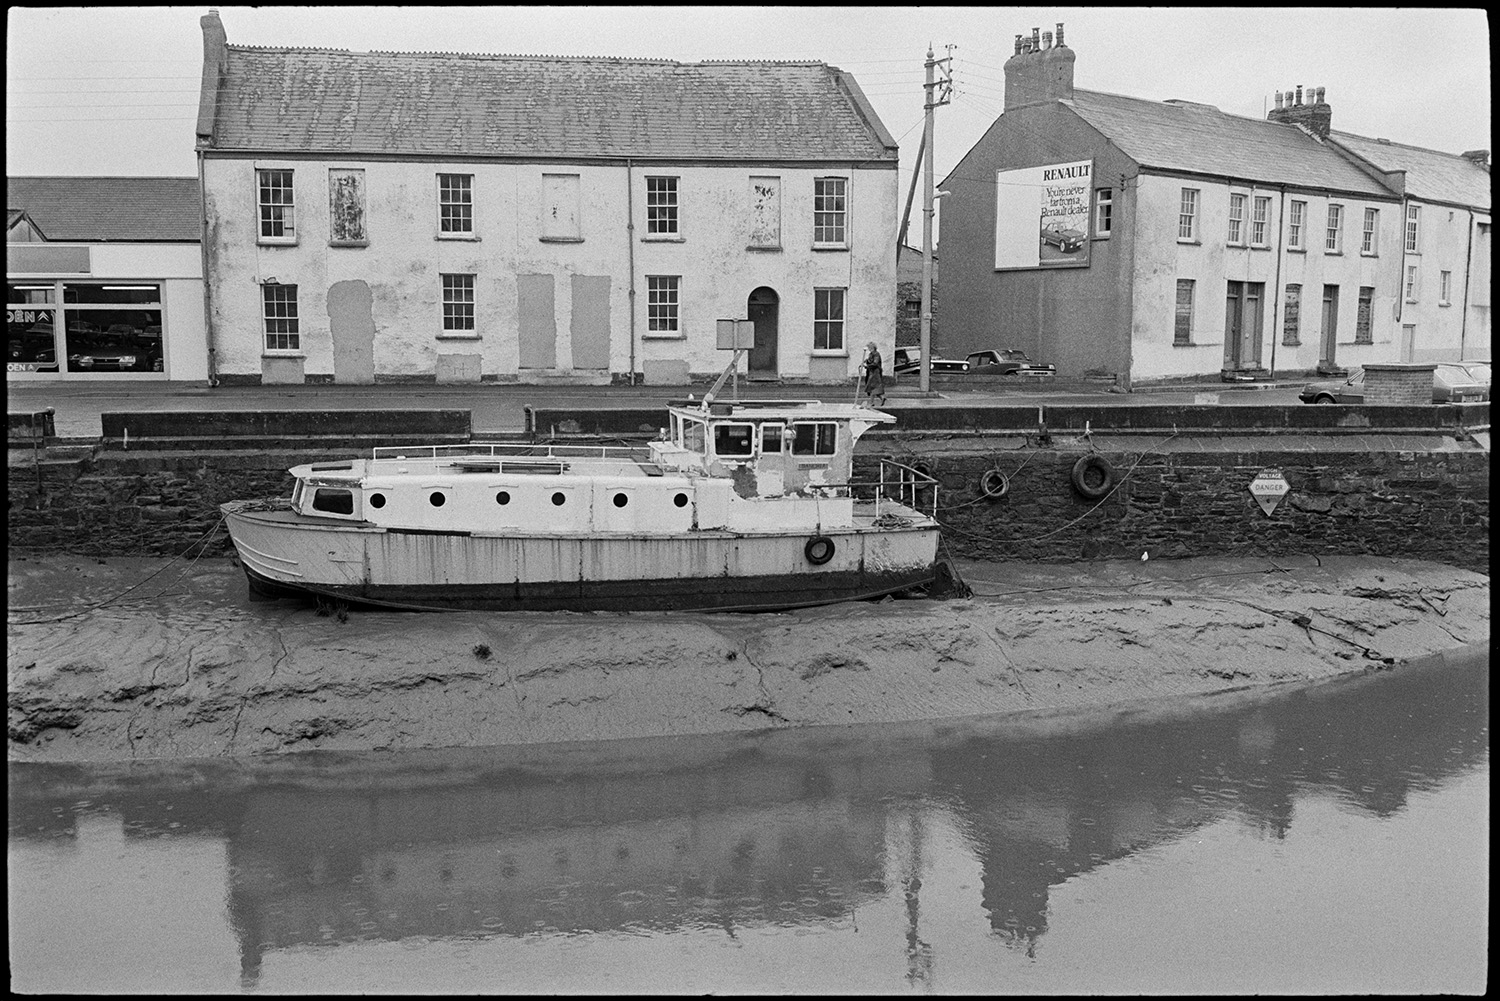 Boat, barge at quayside, houses before renovation.
[View of a boat or barge moored on the mud bank by the Rolle Quay, Barnstaple. Houses behind the Quay with blocked up doorways are visible. They were later renovated.]